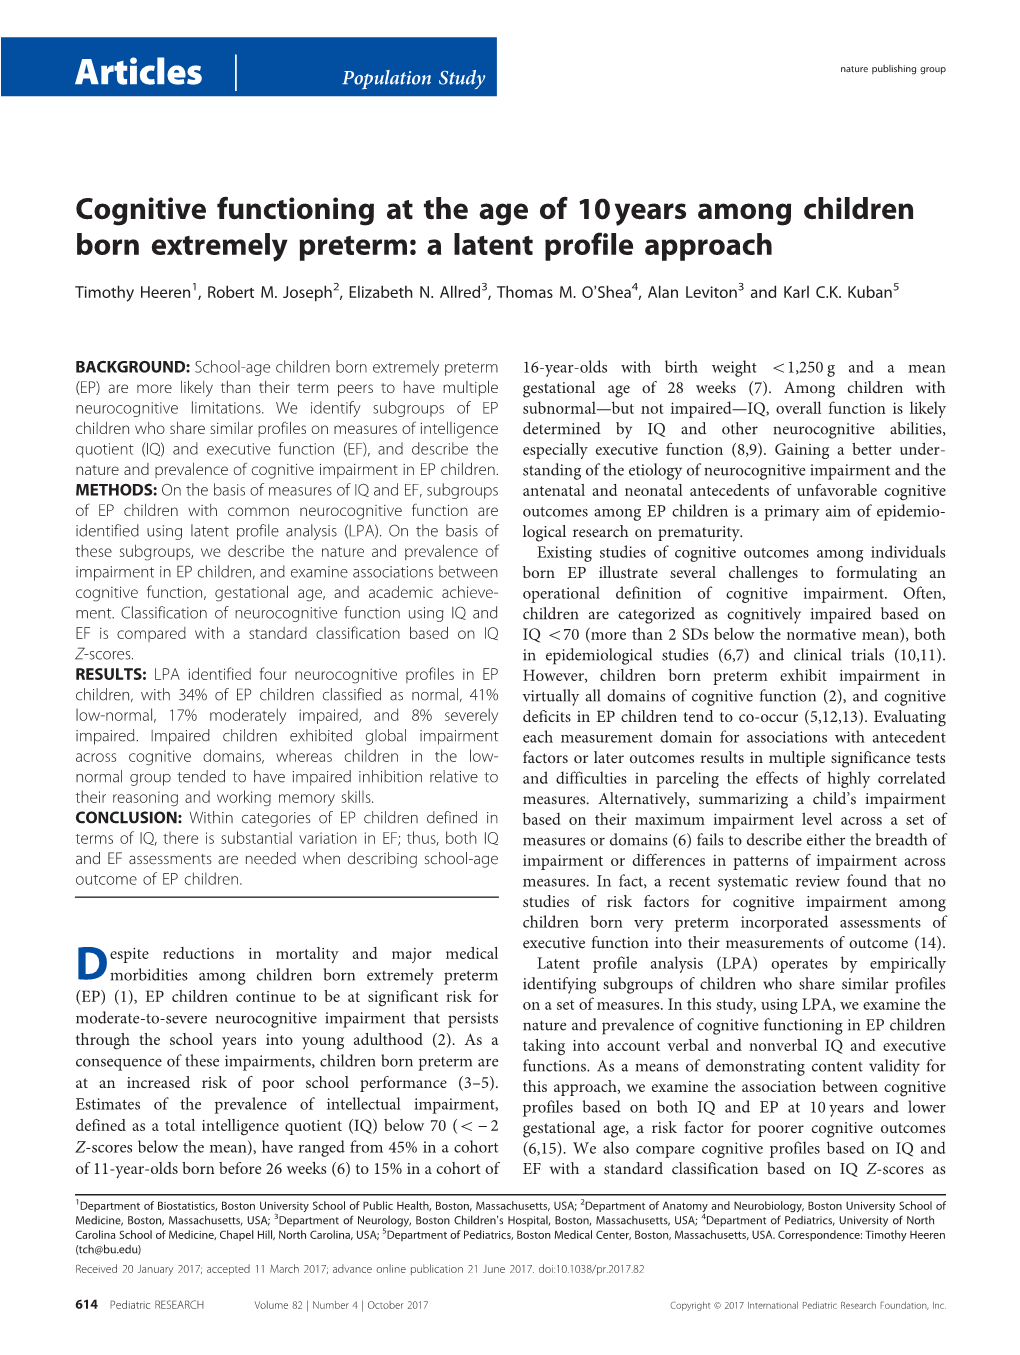 Cognitive Functioning at the Age of 10舁years Among Children